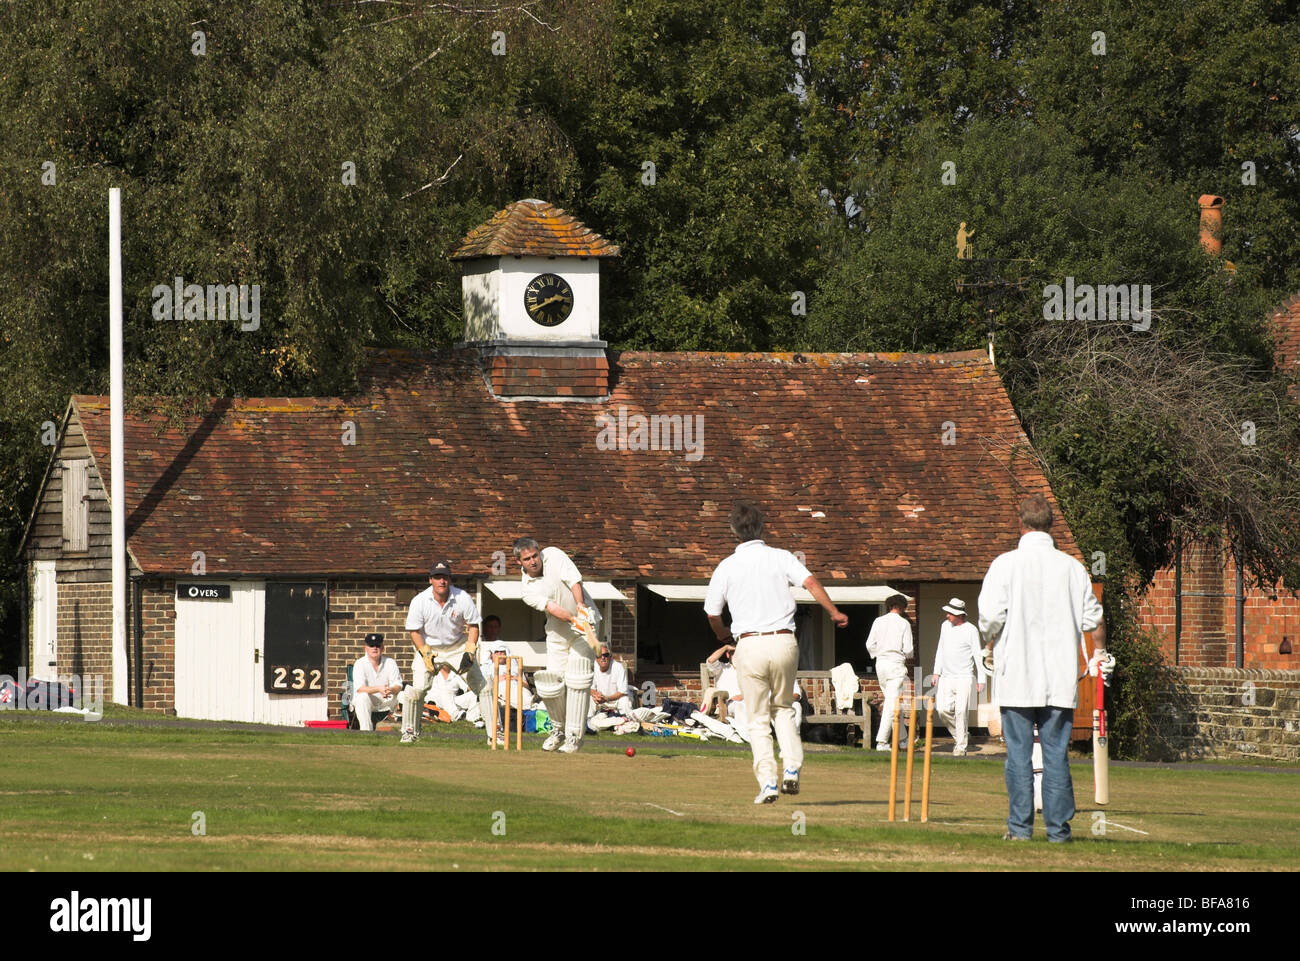 Lurgashall village green sees players participating in a game of cricket on a warm sunny autumn day. Stock Photo